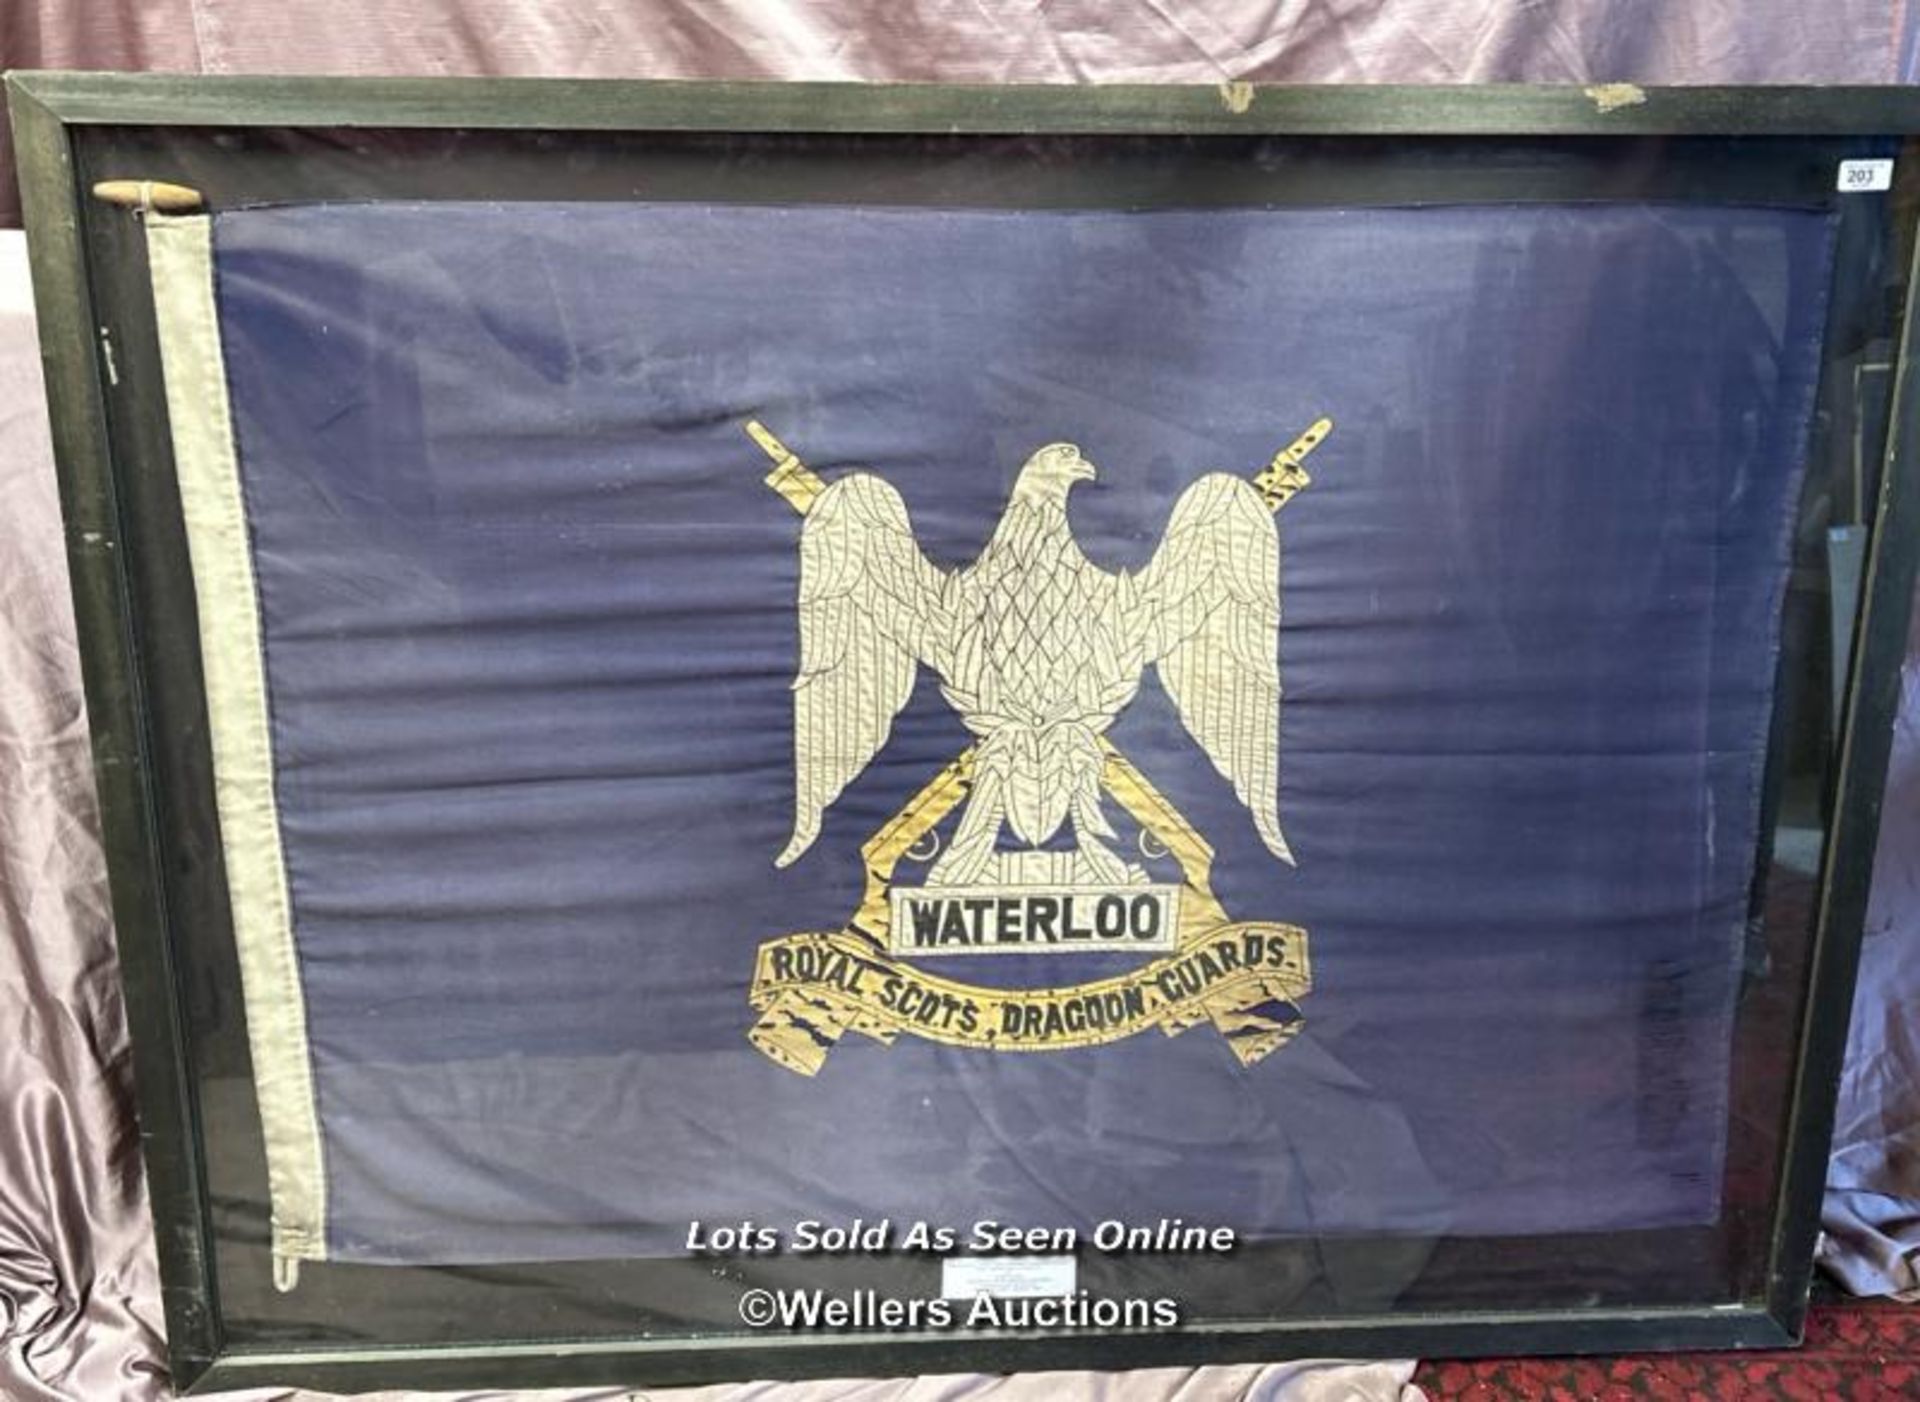 REGIMENTAL FLAG FLOWN DURING OPERATION GRANBY (THE LIBERATION OF KUWAIT) BY D SQUADRON, THE ROYAL